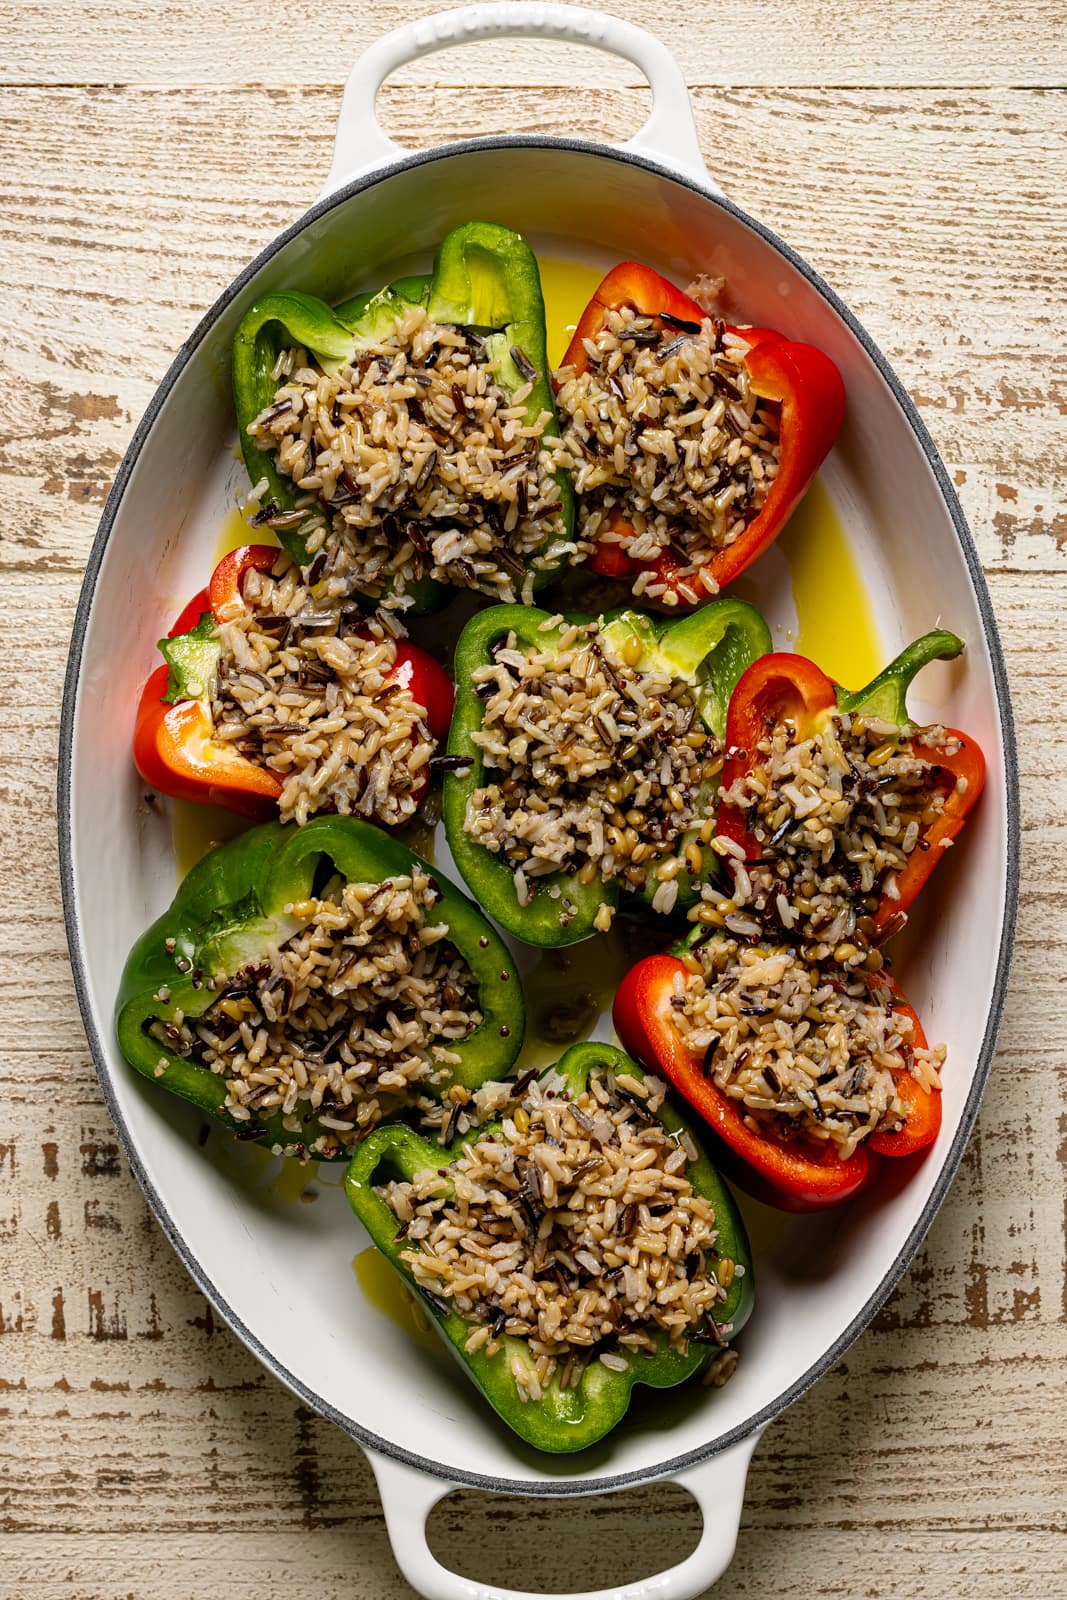 Stuffed peppers prepped in a baking dish.